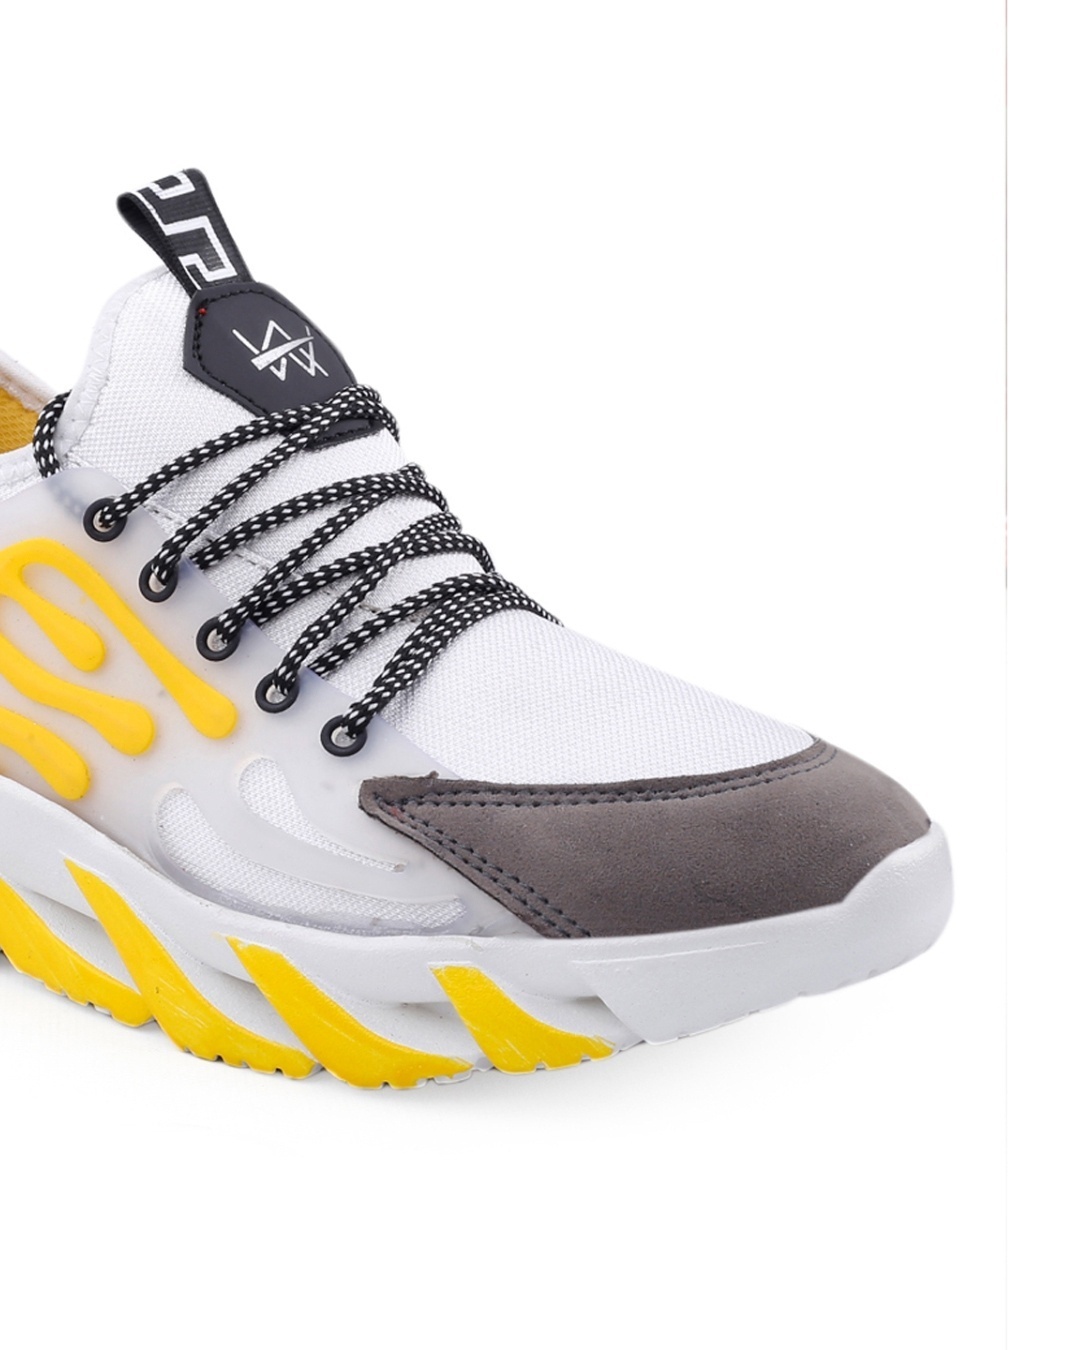 Shop Men's Yellow and White Color Block Casual Shoes